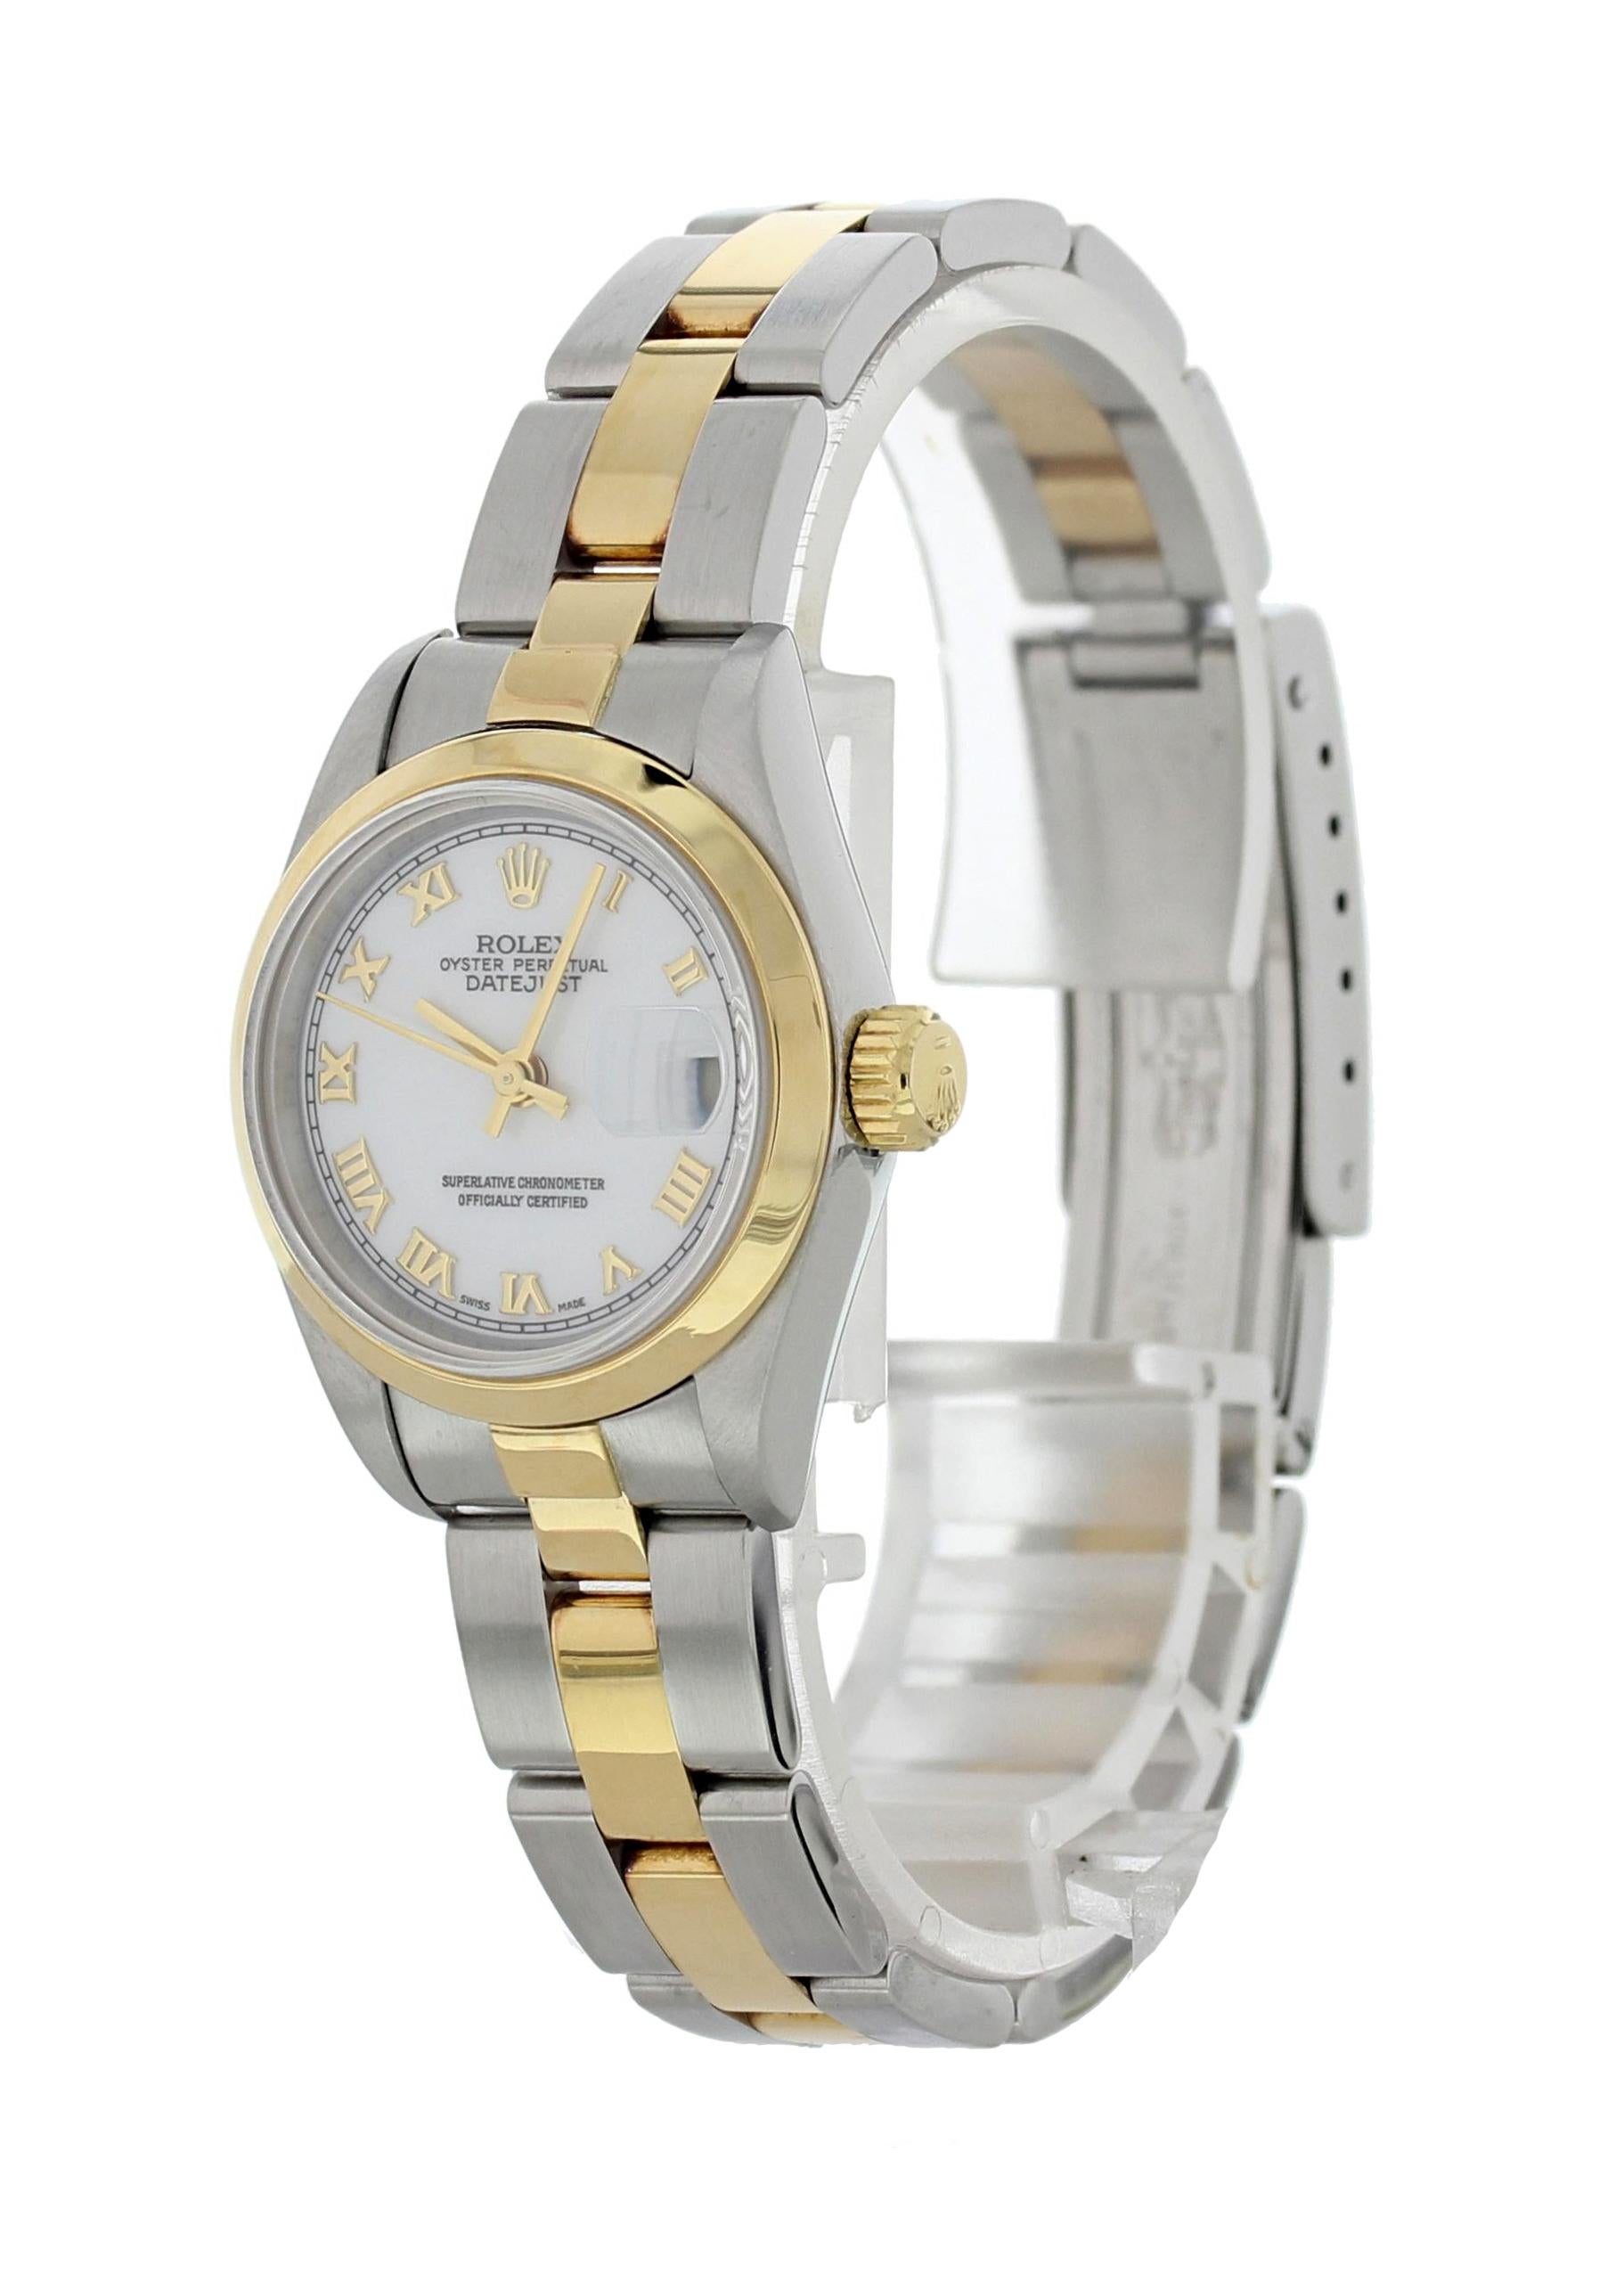 Rolex Datejust 69163 Ladies Watch. 26mm stainless steel case with an 18k yellow gold smooth bezel. white dial with gold hands and Roman numeral hour markers. Minute markers around the outer rim. Quickset date display. Two-tone stainless steel and